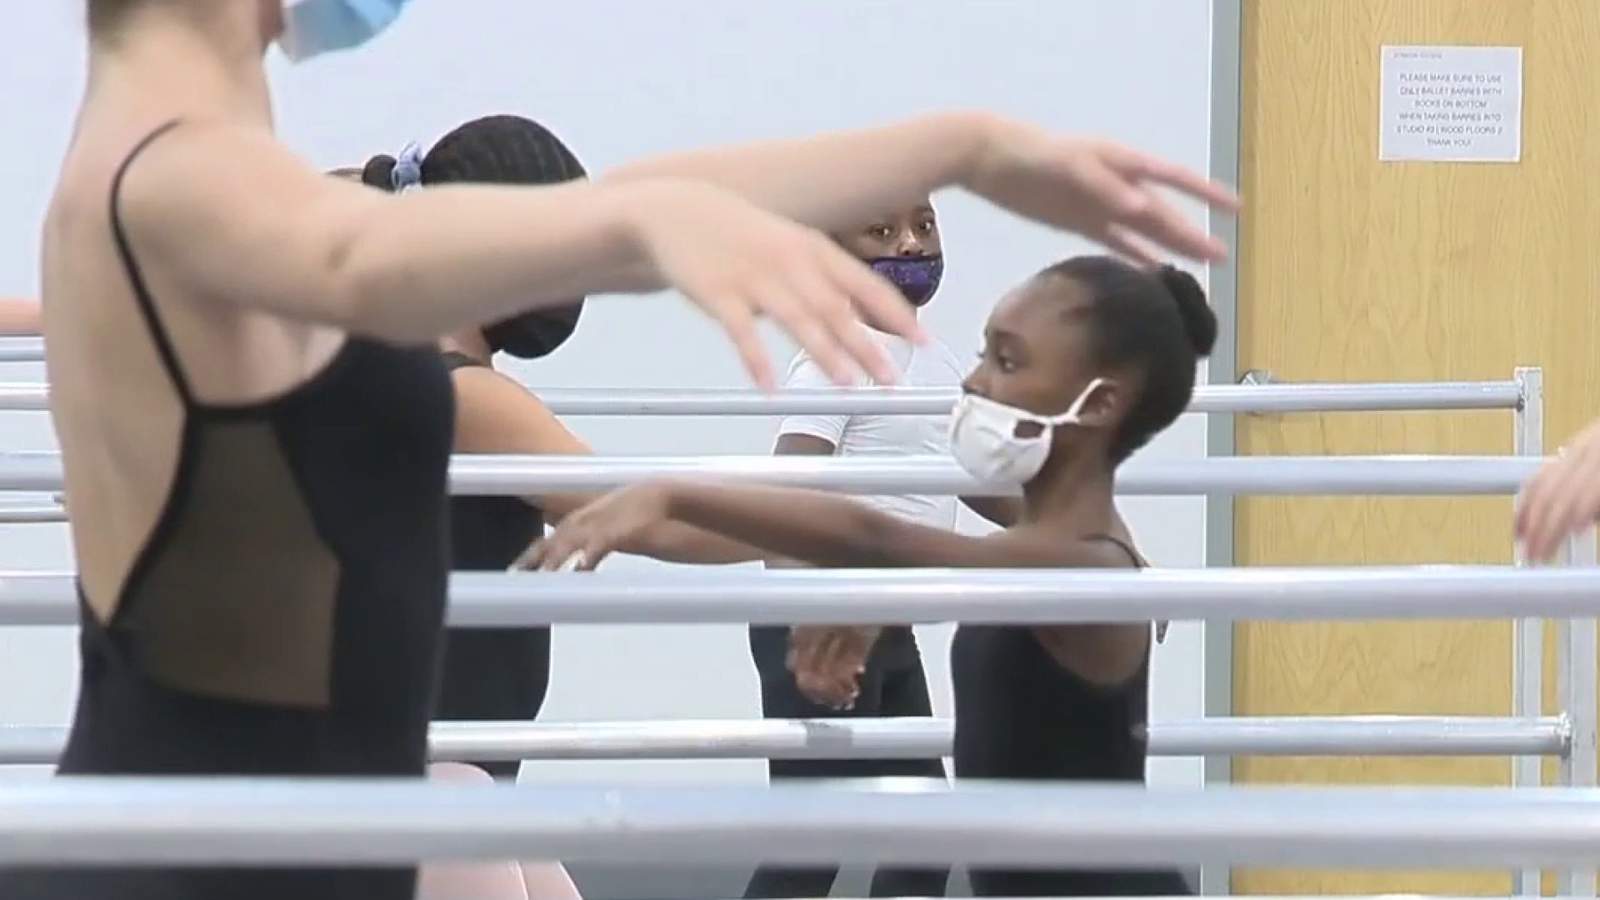 Local ballet school director, owner says its her mission to make dance as inclusive as possible